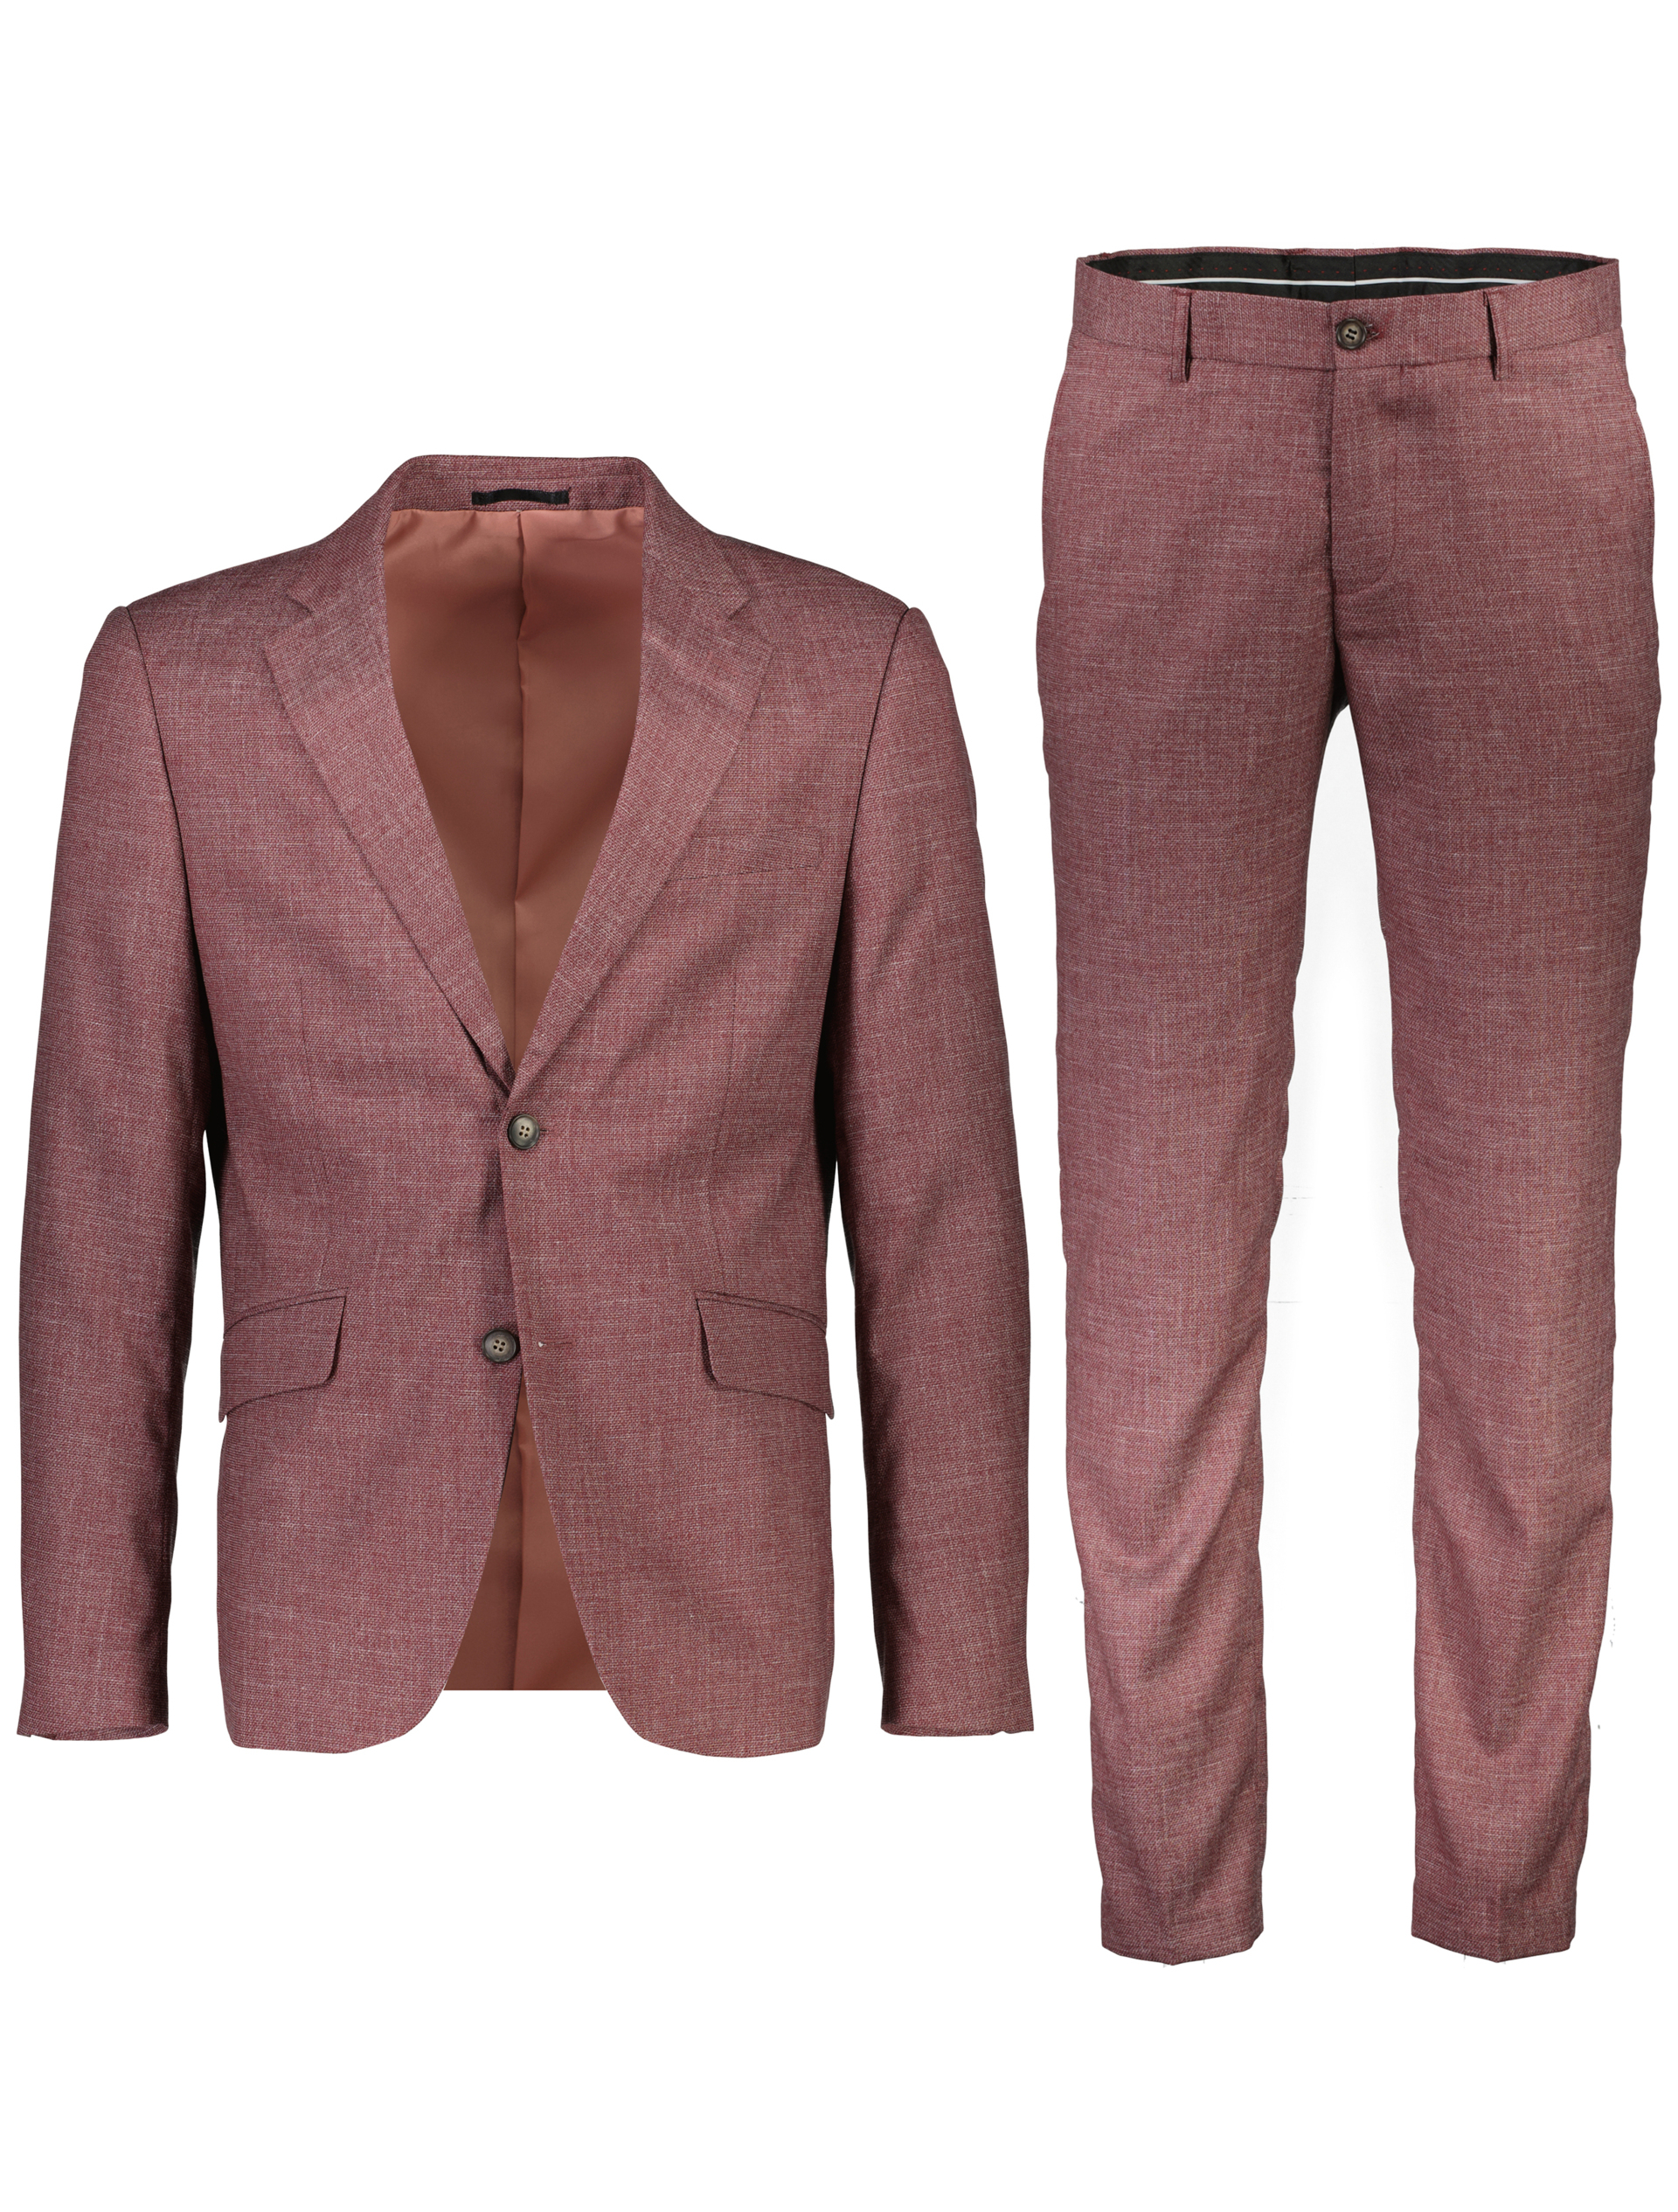 Lindbergh Suit red / dusty rose